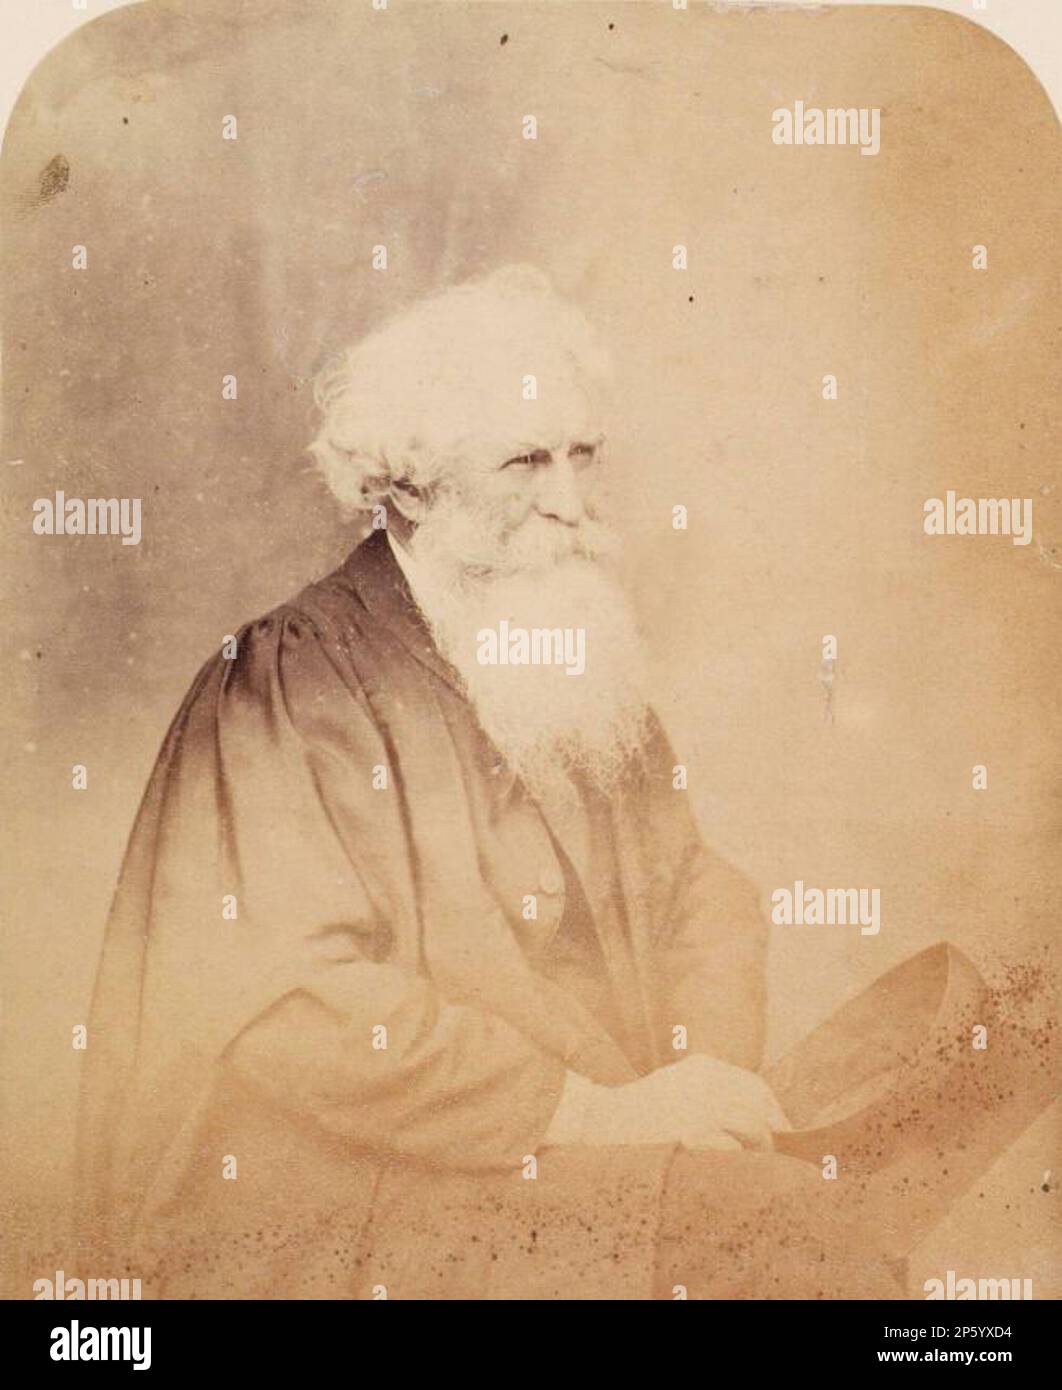 Thomas Combe in Cloak and Holding Mortar Board, from an album compiled by Sir John Everett Millais, Charles Dodgson (Daresbury, Cheshire, England, 1832 - 1898) 30 June 1860 Stock Photo